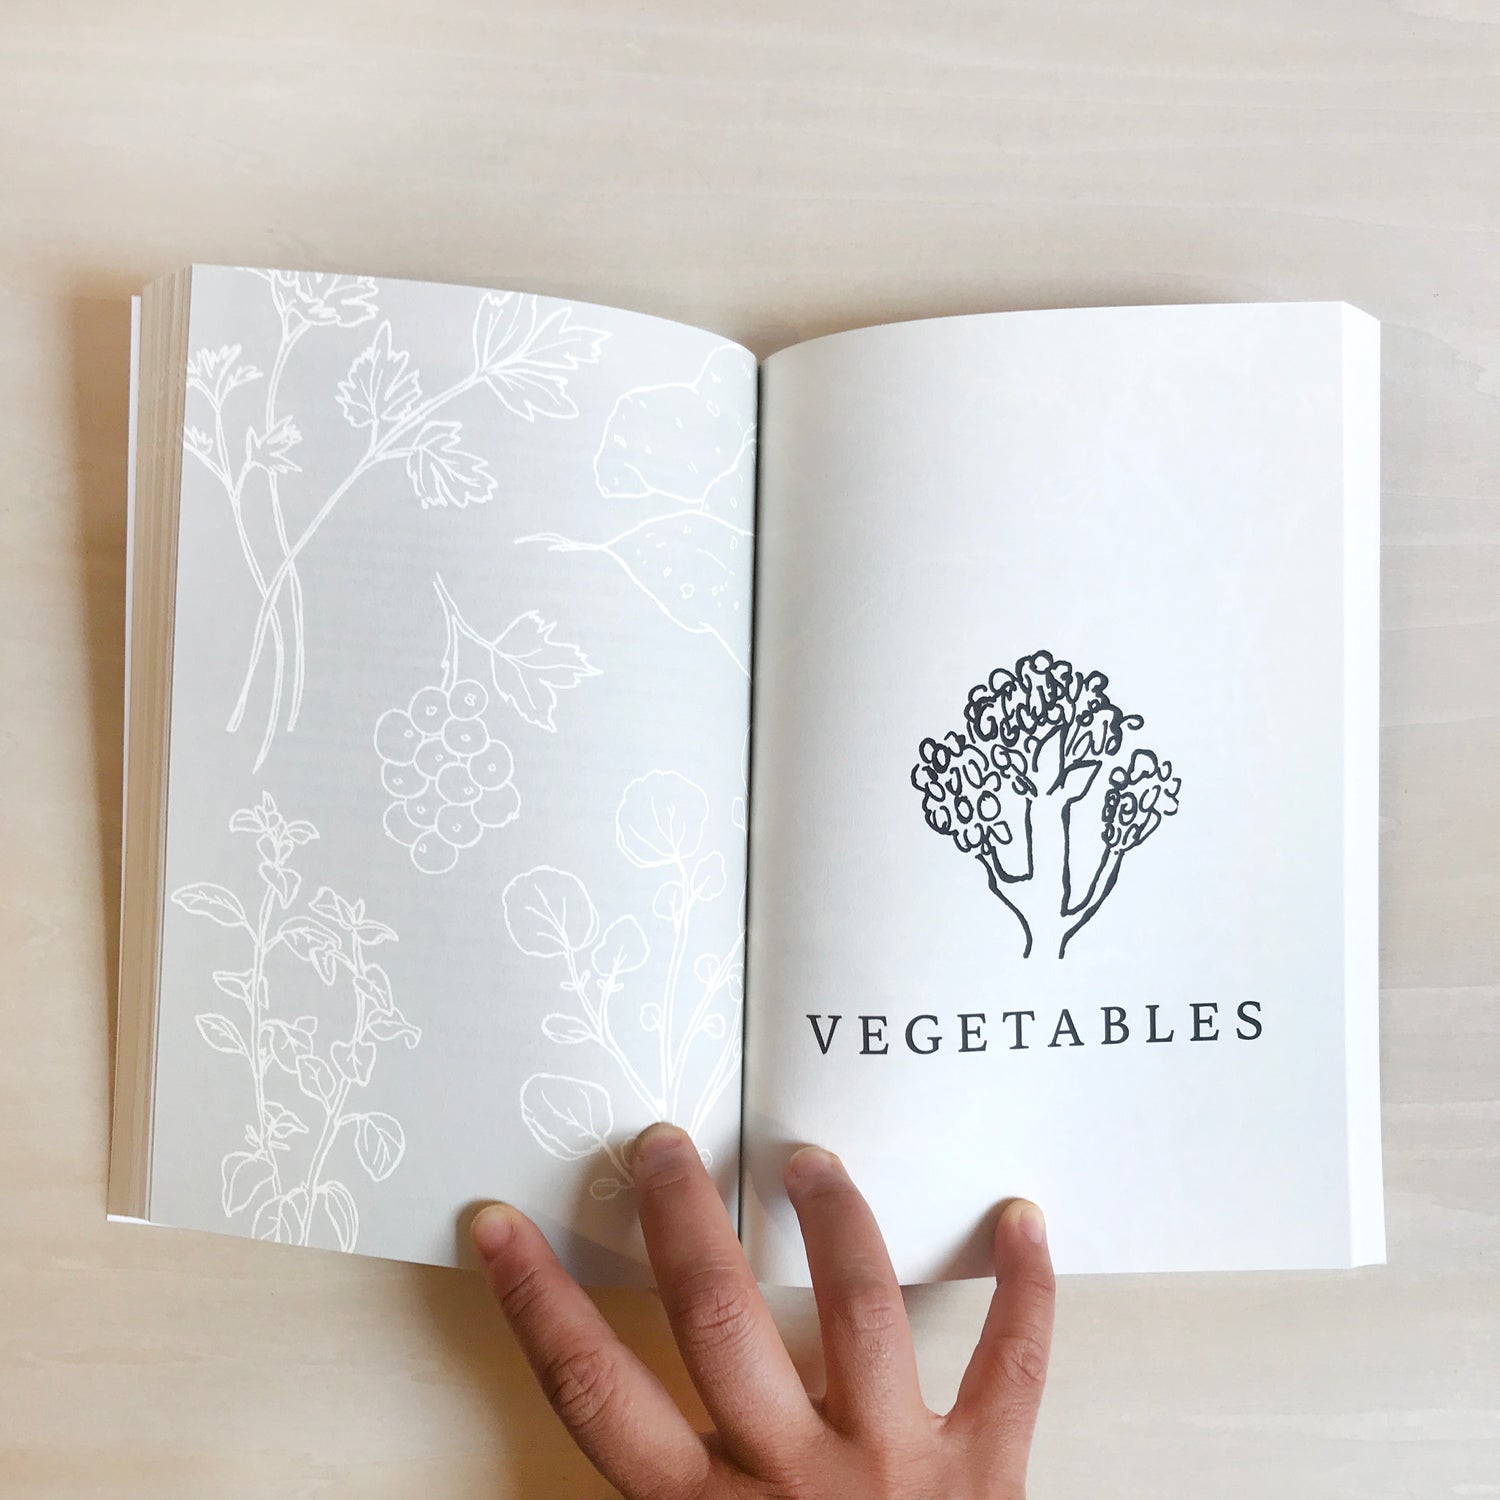 "Growing Perennial Foods" book open to "vegetable" chapter page featuring an illustrated broccoli with title below on the right page, light gray and white patterning of herbs on left page with a hand holding the spread open on light wood desk